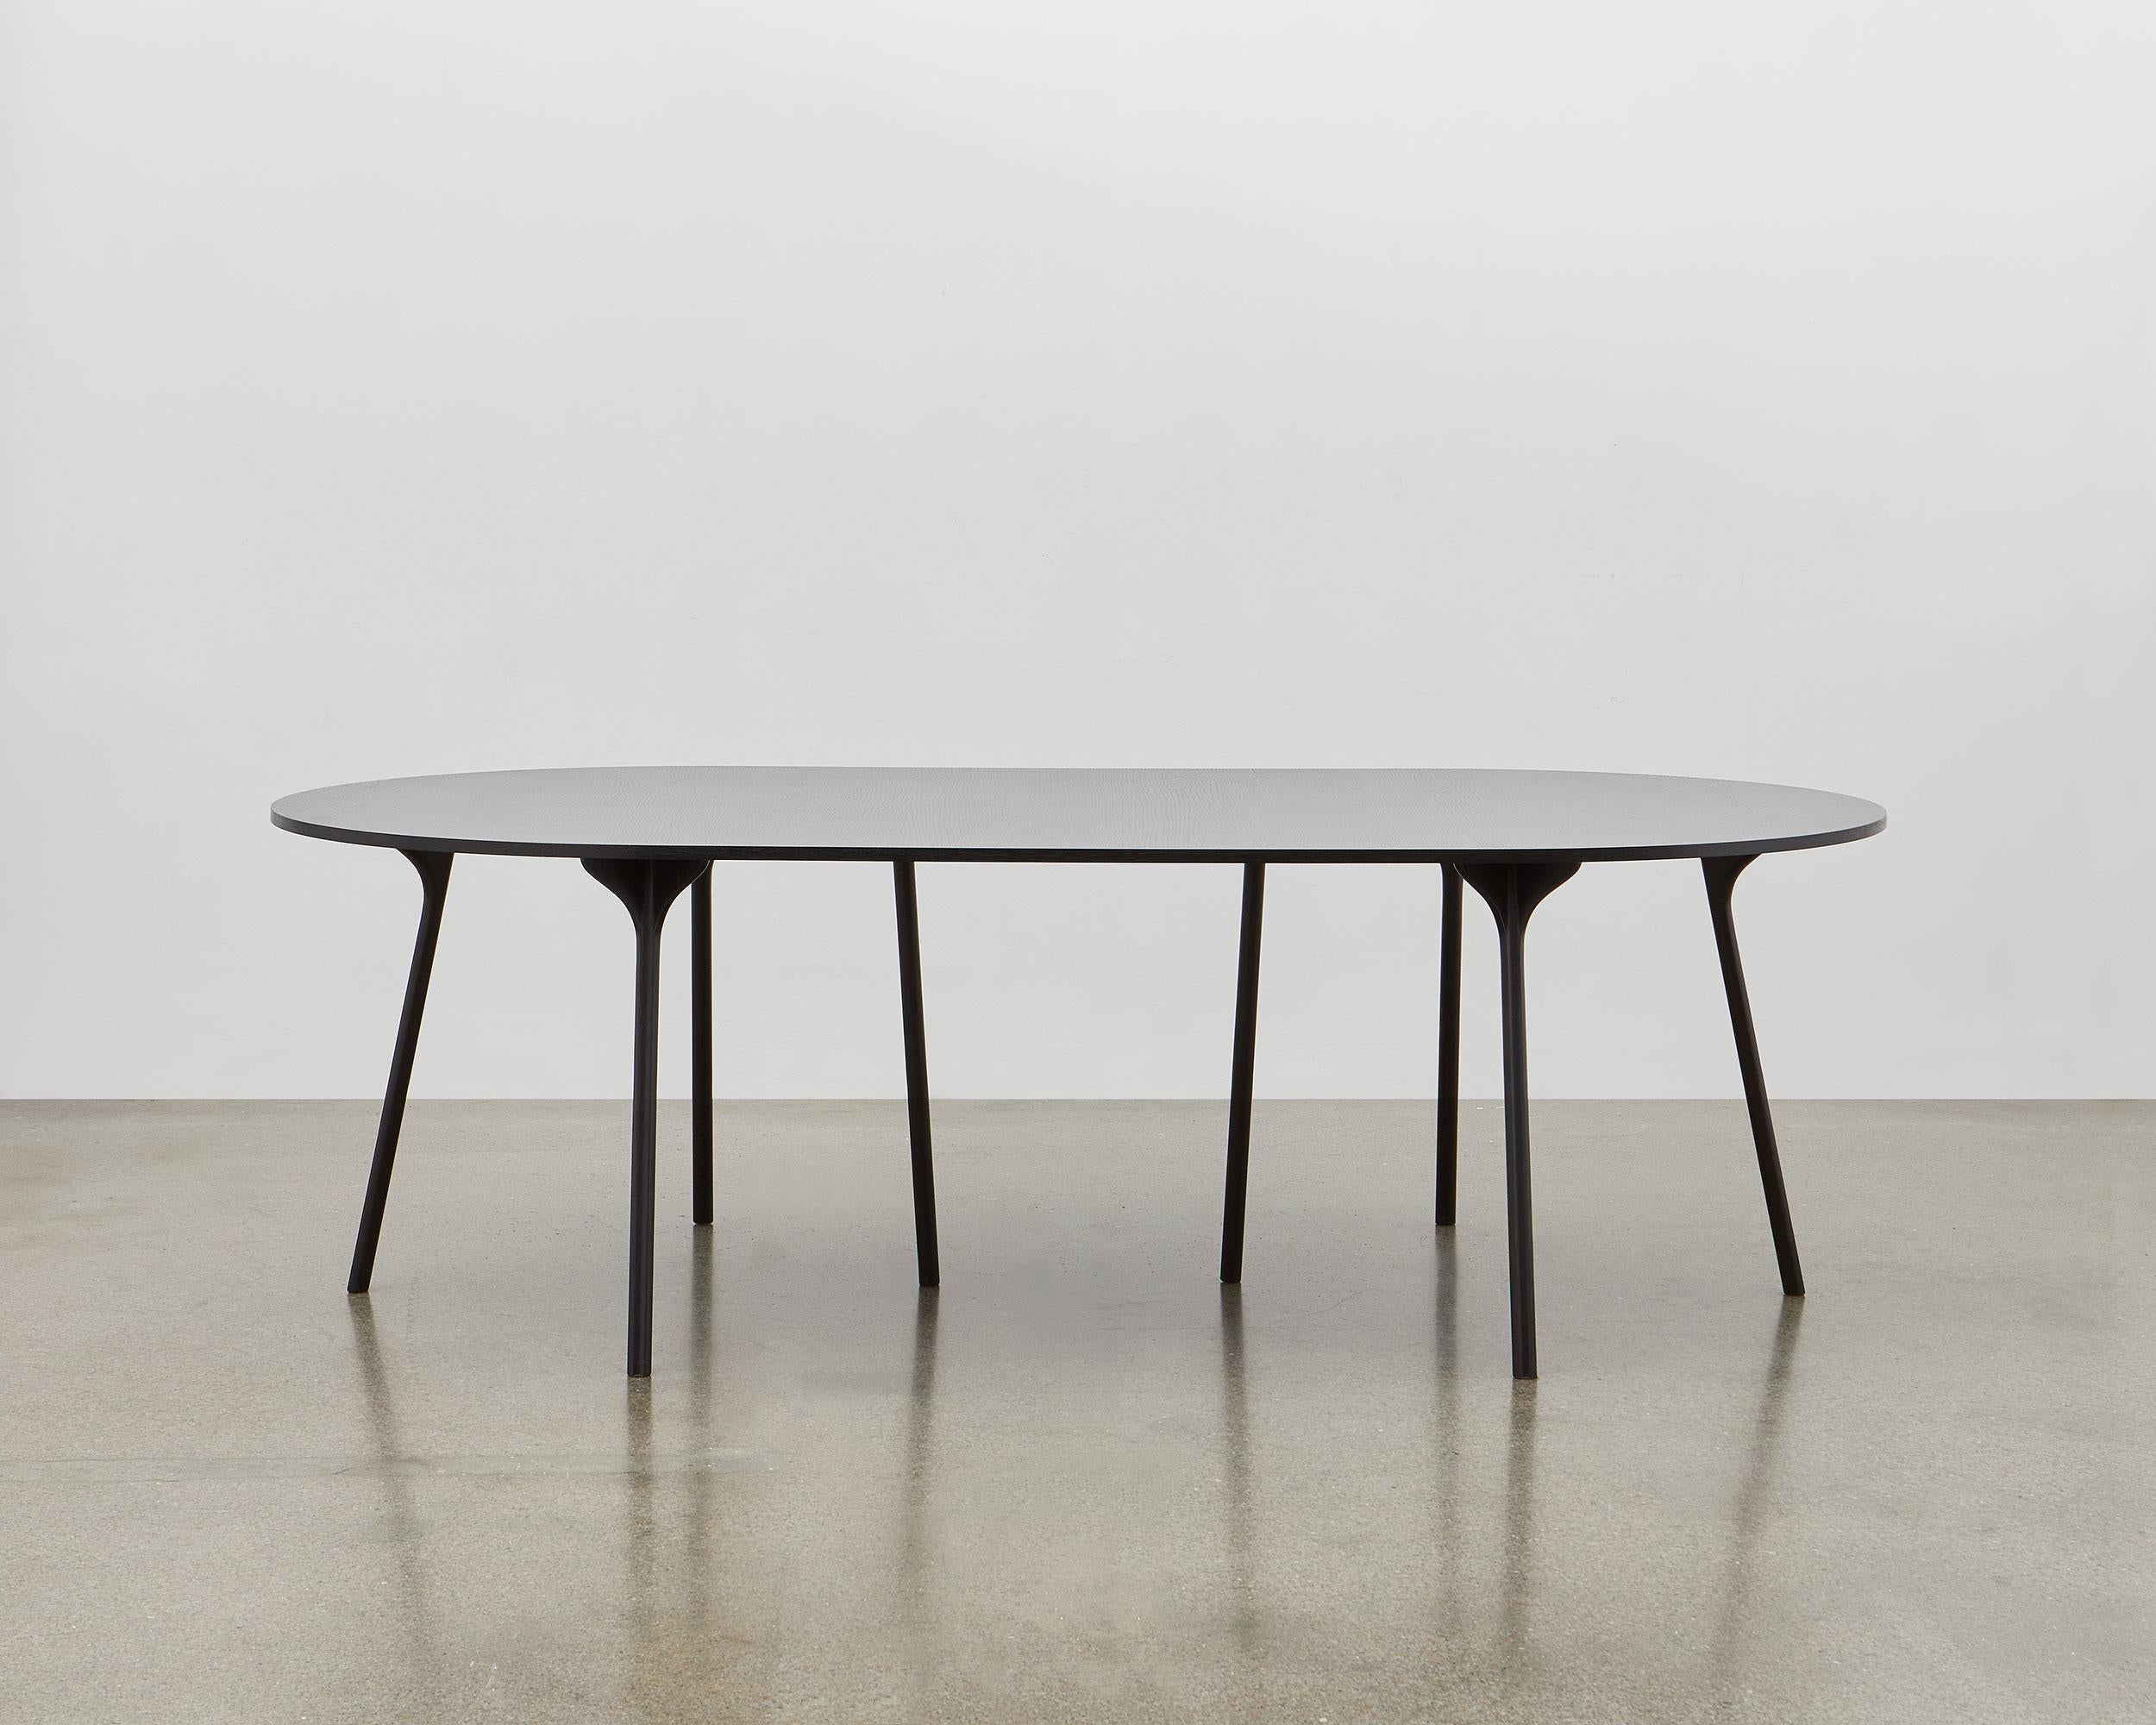 The intricately shaped legs of the PH Circle Table – inspired by the agile movement of the scarab beetle, together with the benefit of precision design and engineering – enable Poul Henningsen to design a table with the most unobtrusive of legs.